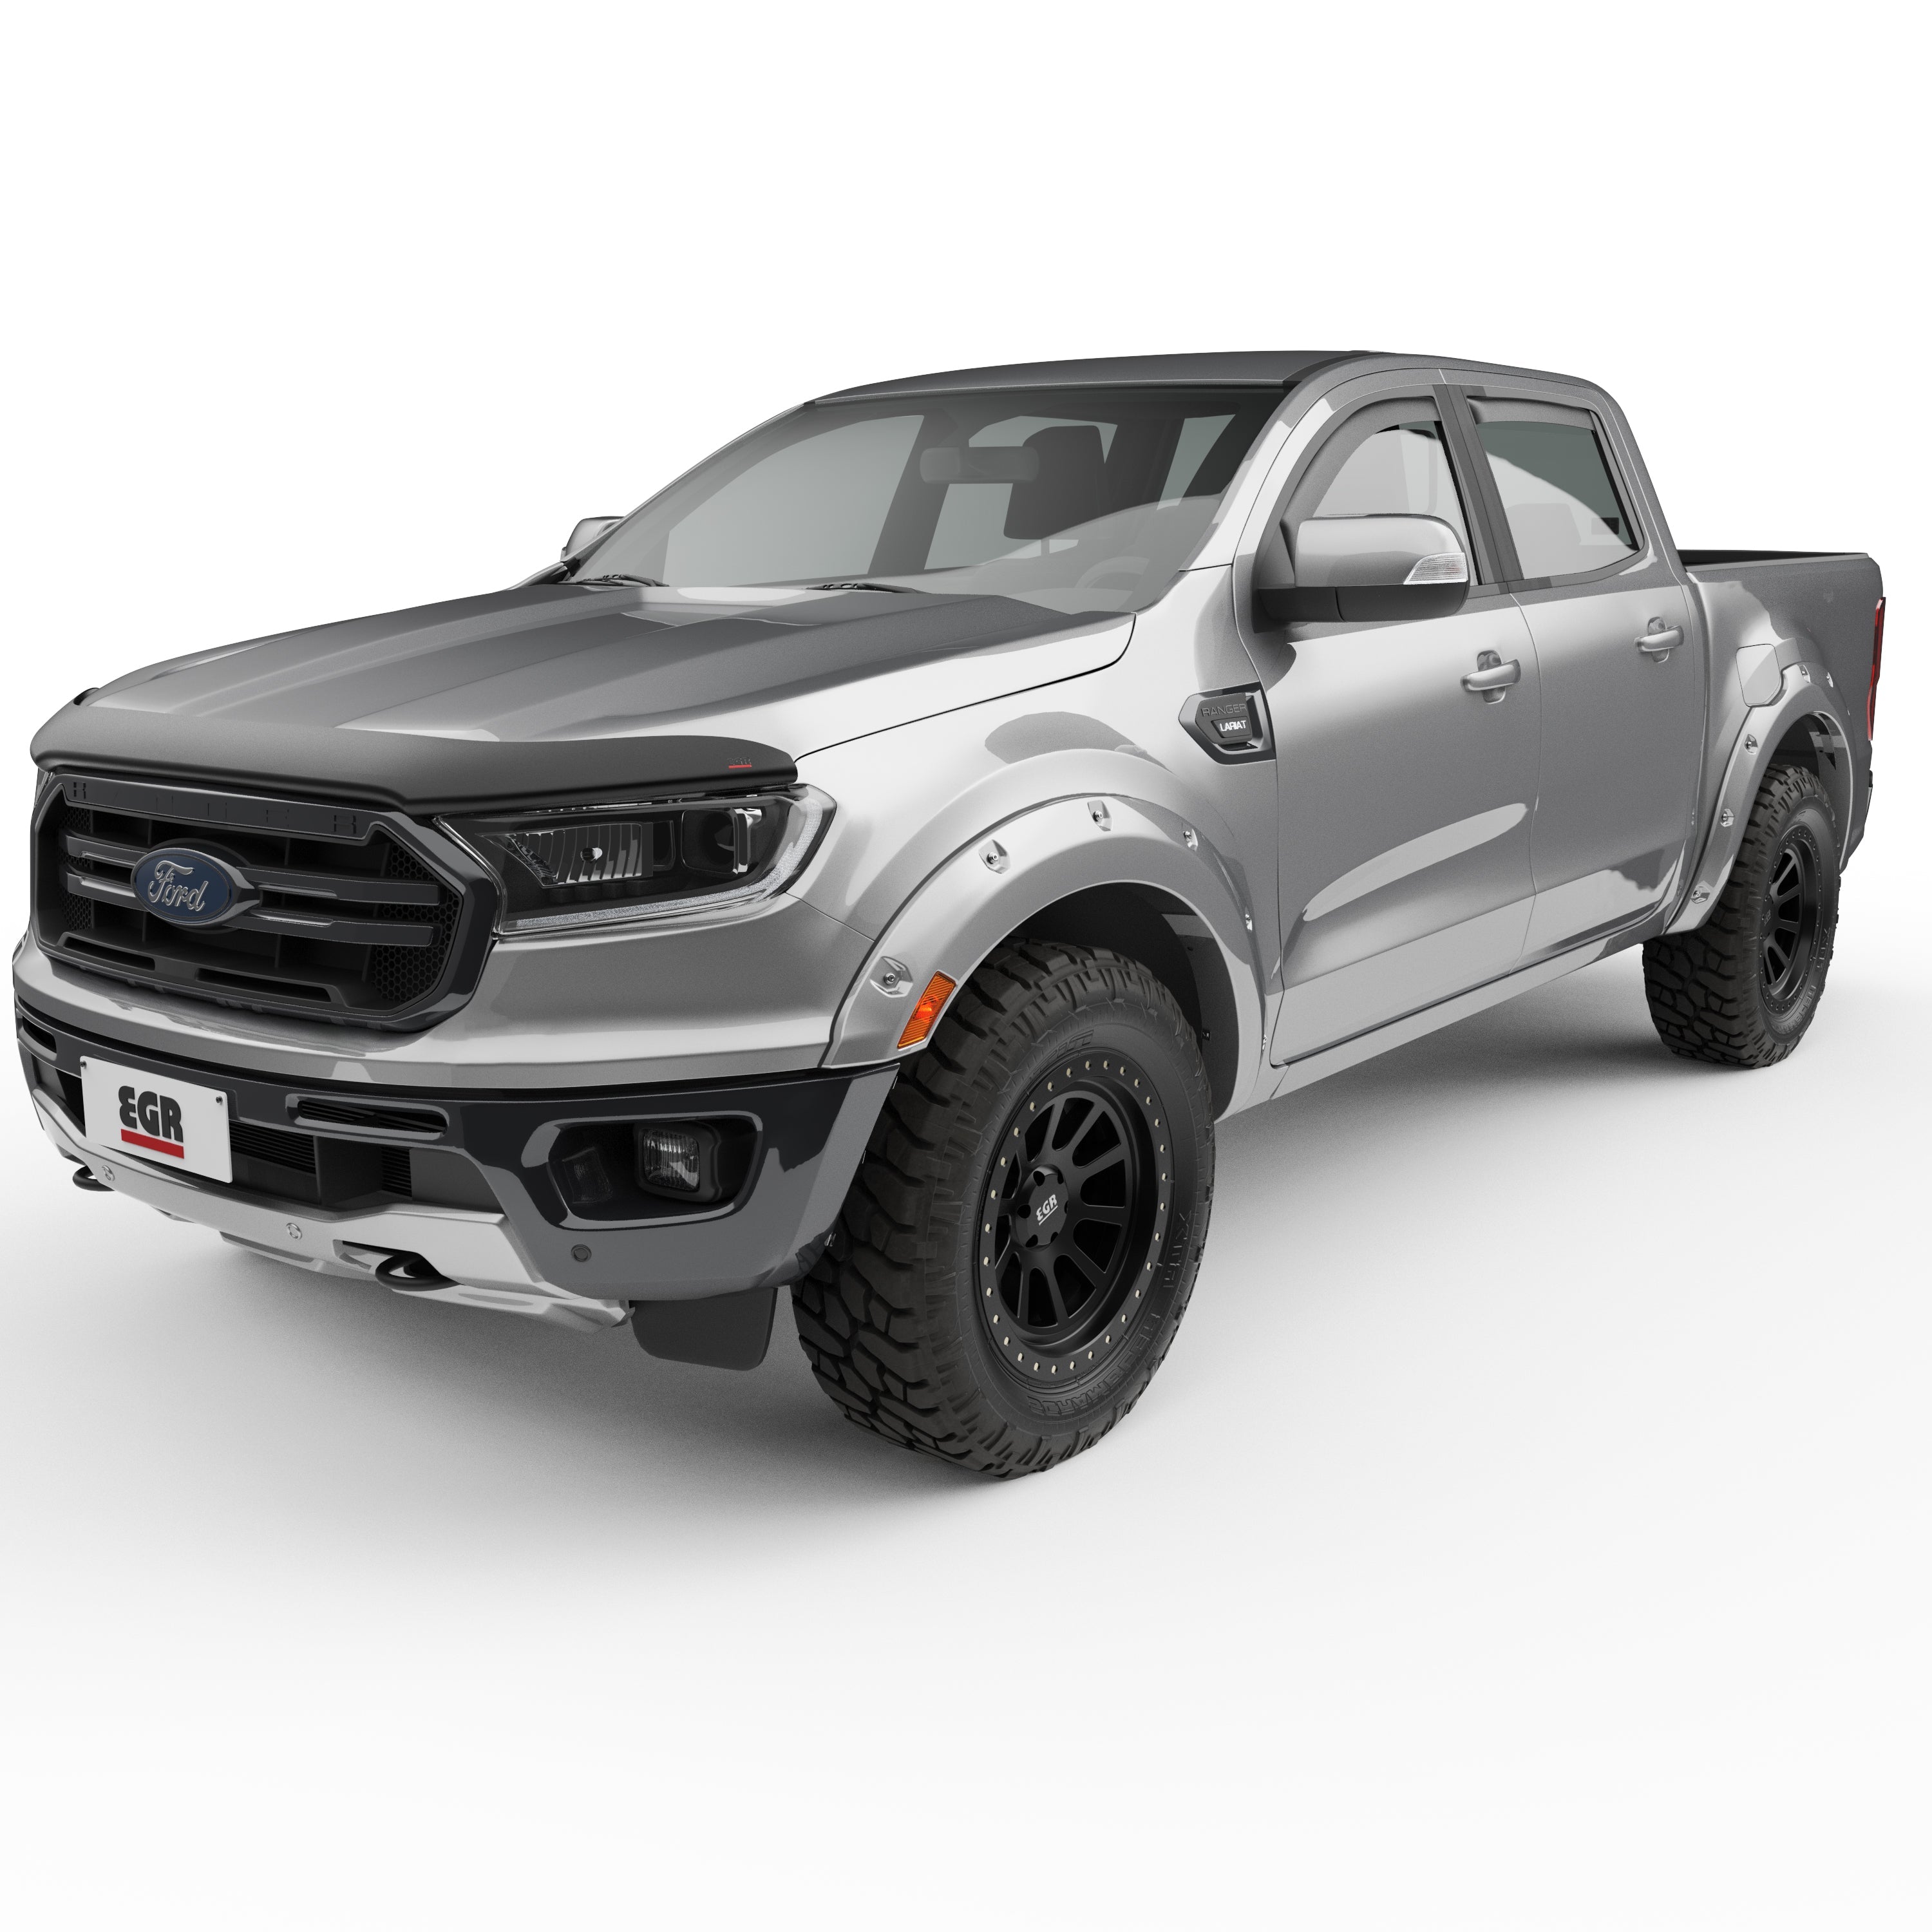 EGR 2019-2022 Ford Ranger Extended Crew Cab Pickup Painted To Code Ingot Silver Set Of 4 Traditional Bolt-On Look Fender Flares 793554-UX